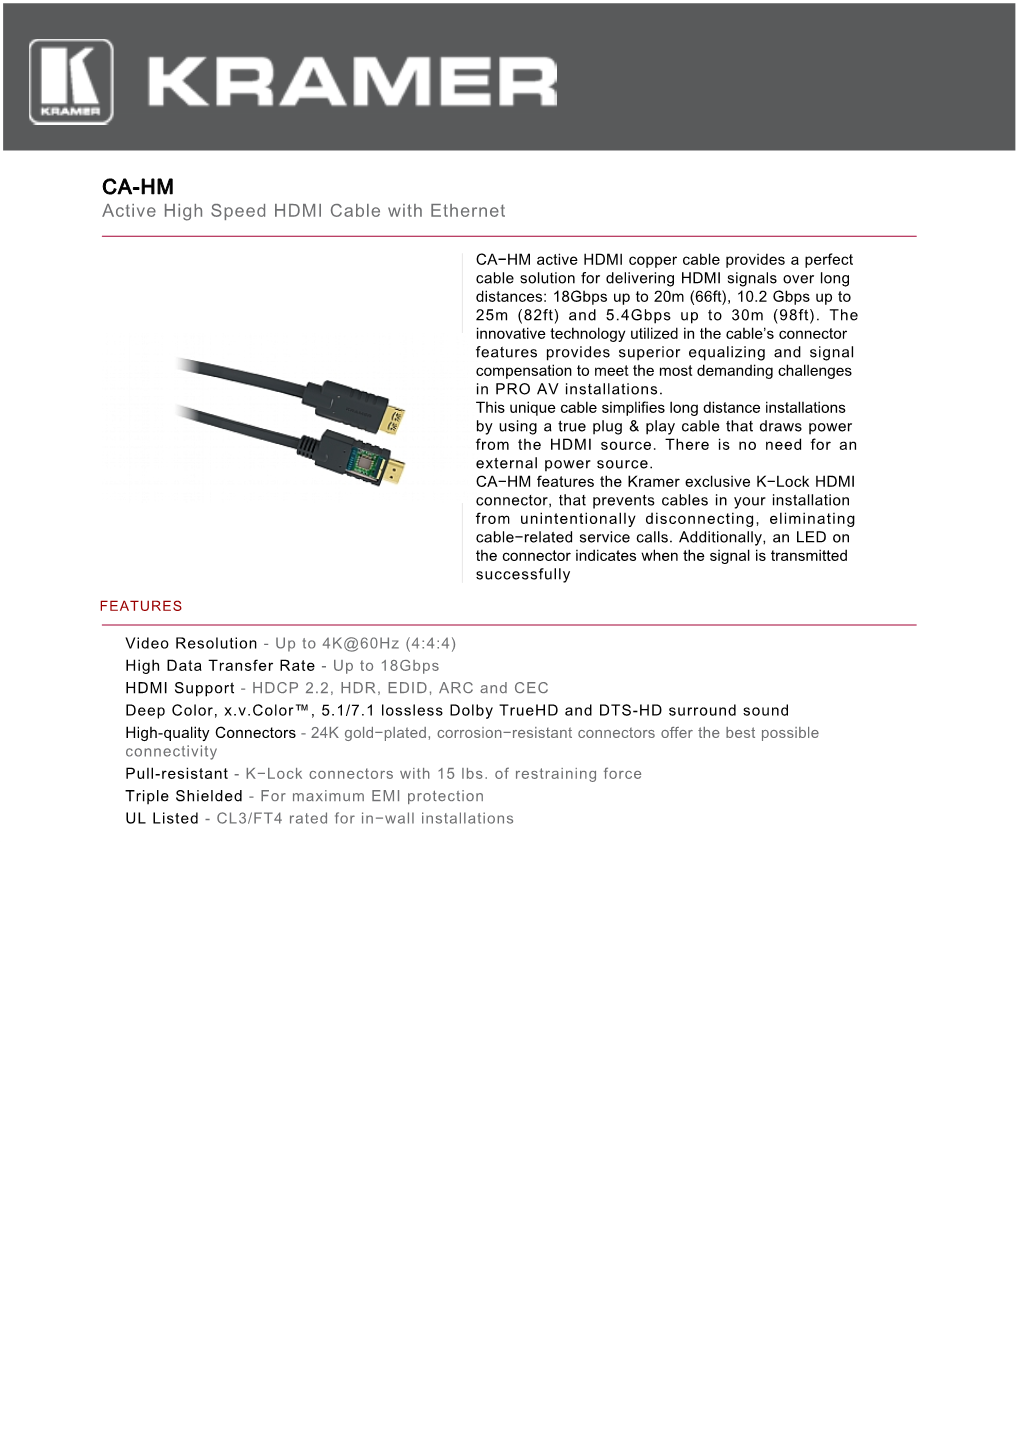 Active High Speed HDMI Cable with Ethernet